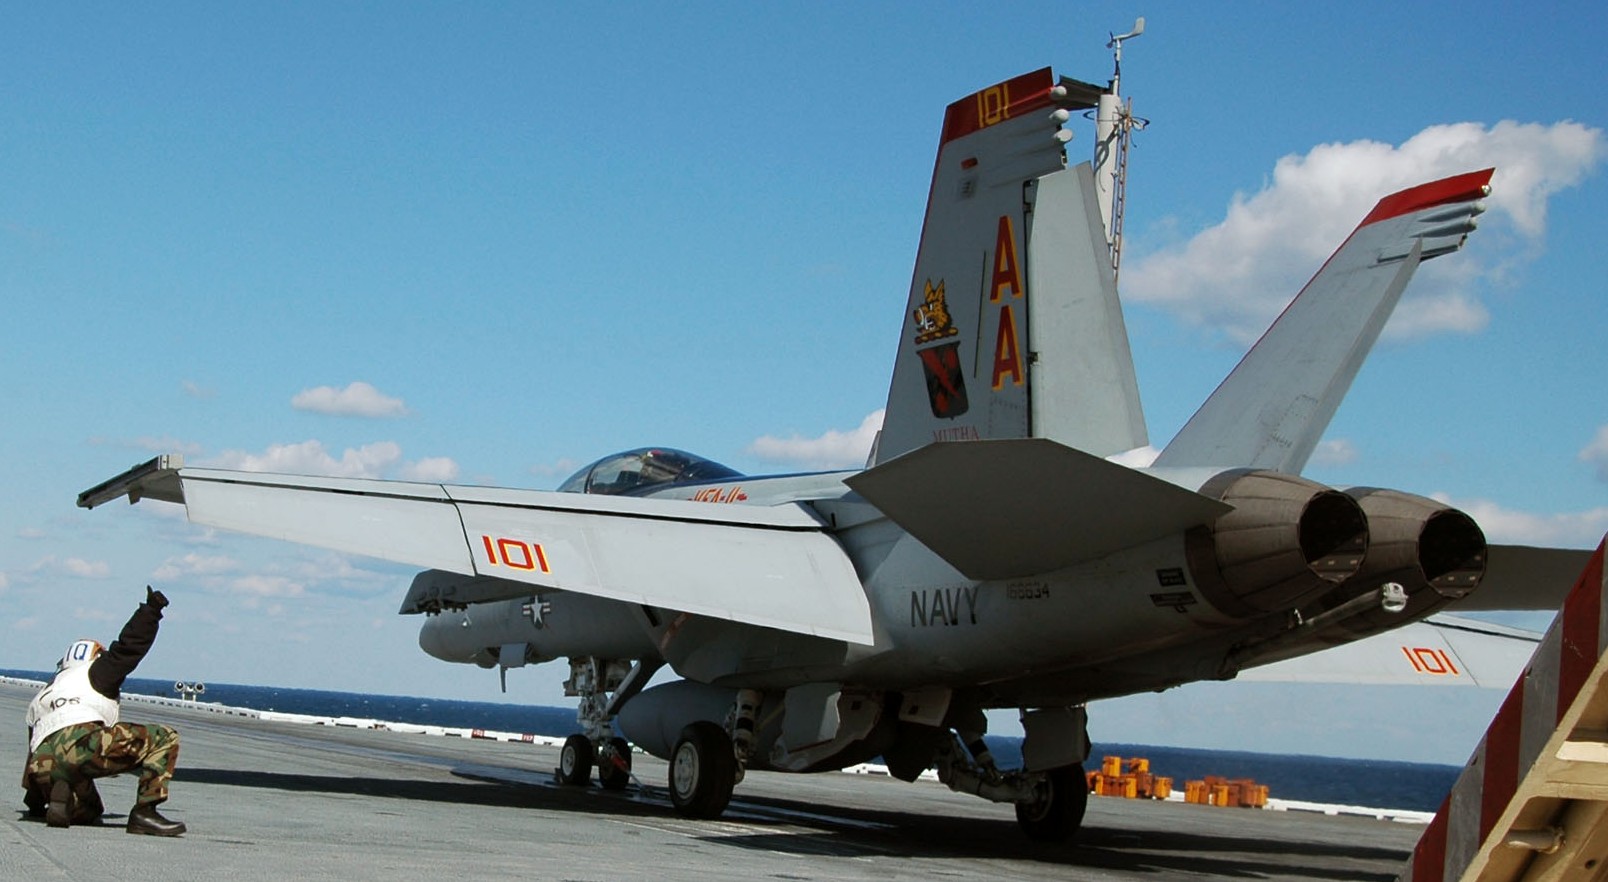 vfa-11 red rippers strike fighter squadron us navy f/a-18f super hornet carrier air wing cvw-17 65